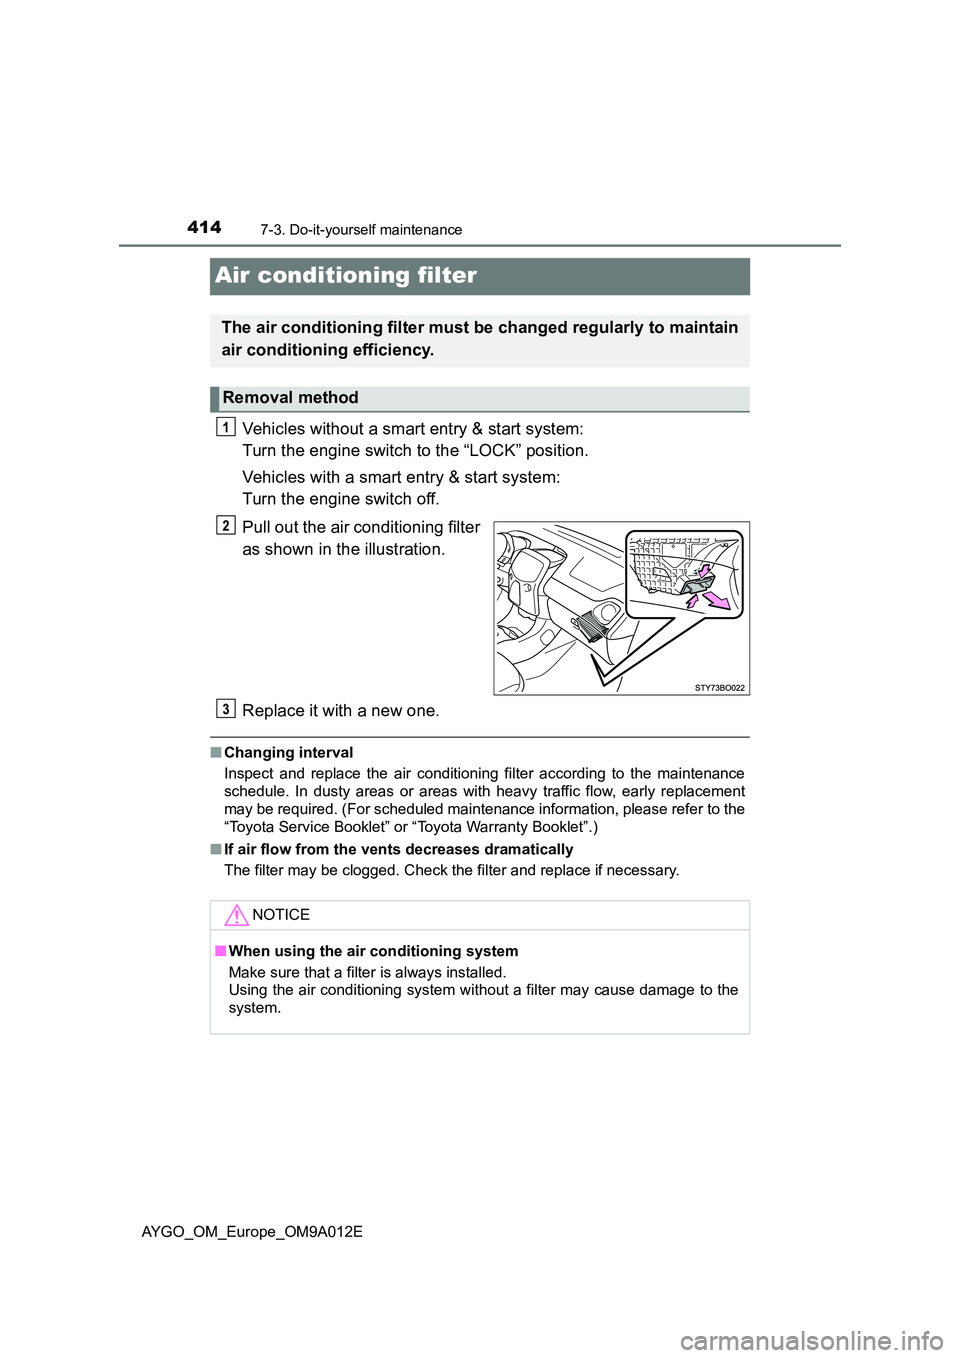 TOYOTA AYGO 2021  Owners Manual 4147-3. Do-it-yourself maintenance
AYGO_OM_Europe_OM9A012E
Air conditioning filter
Vehicles without a smart entry & start system:  
Turn the engine switch to the “LOCK” position. 
Vehicles with a 